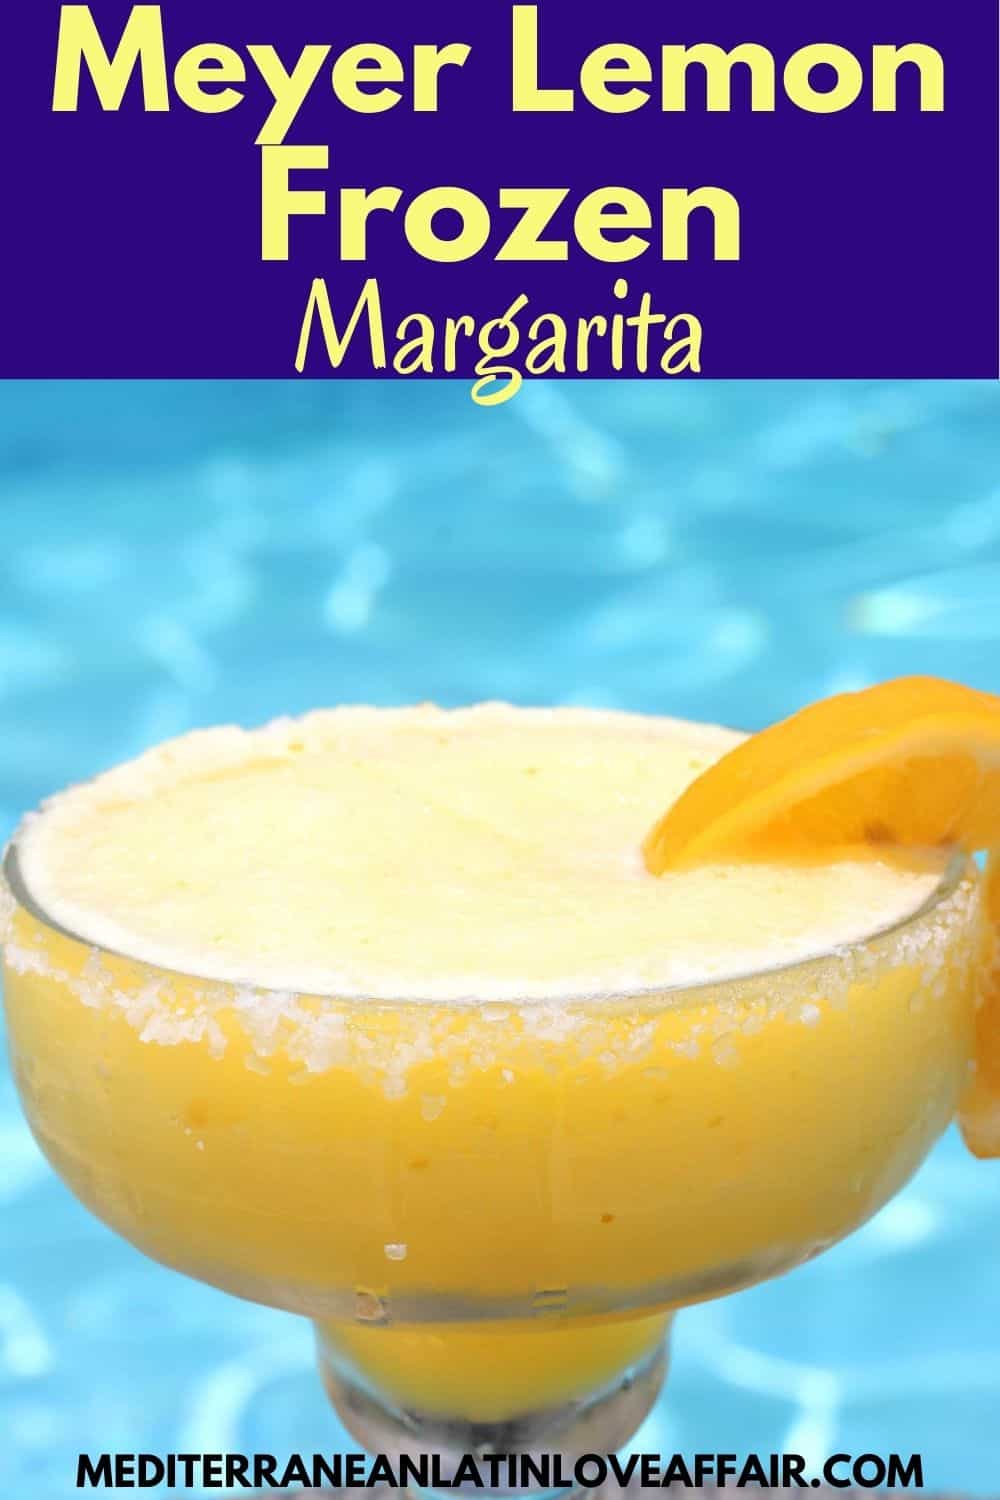 An image created specifically for Pinterest. It has the picture of the frozen lemon margarita as well as a title bar on top of the picture as well as the website link in the bottom.